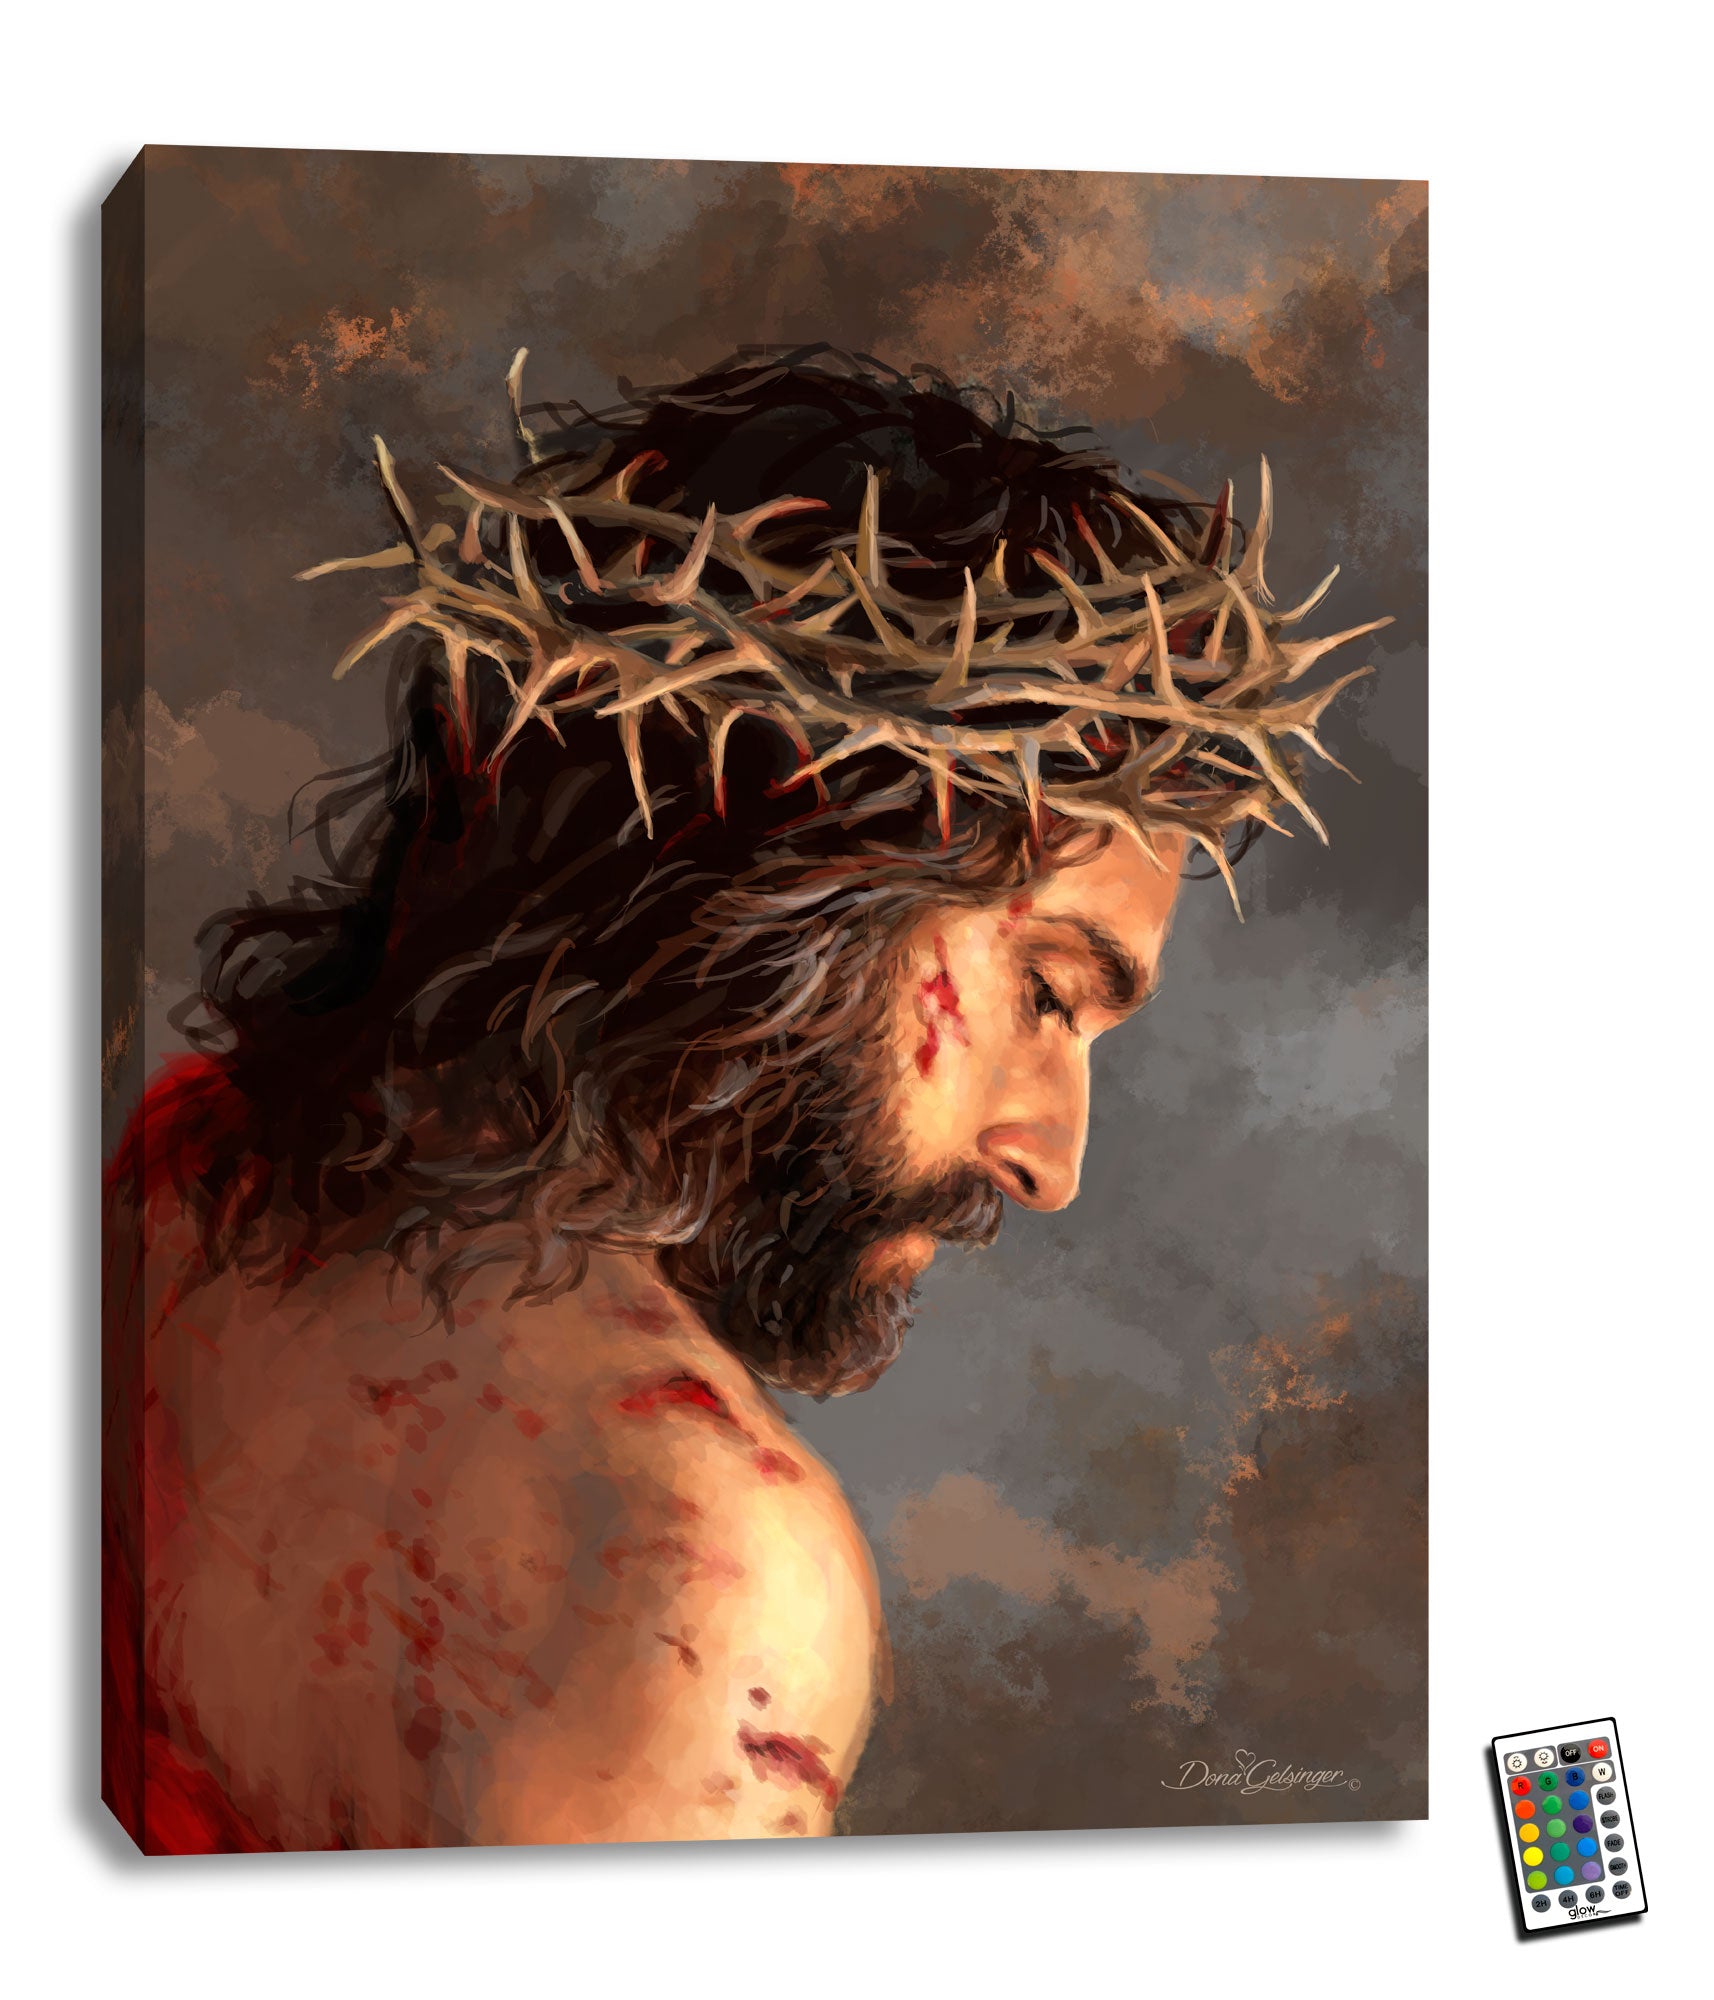 Introducing the Crown of Thorns 18x24 Fully Illuminated LED Art, a stunning portrayal of Jesus in the midst of his suffering. This breathtaking painting captures the heart-wrenching moment when Jesus wore a crown of thorns, a symbol of the sacrifice he made for all of humanity.